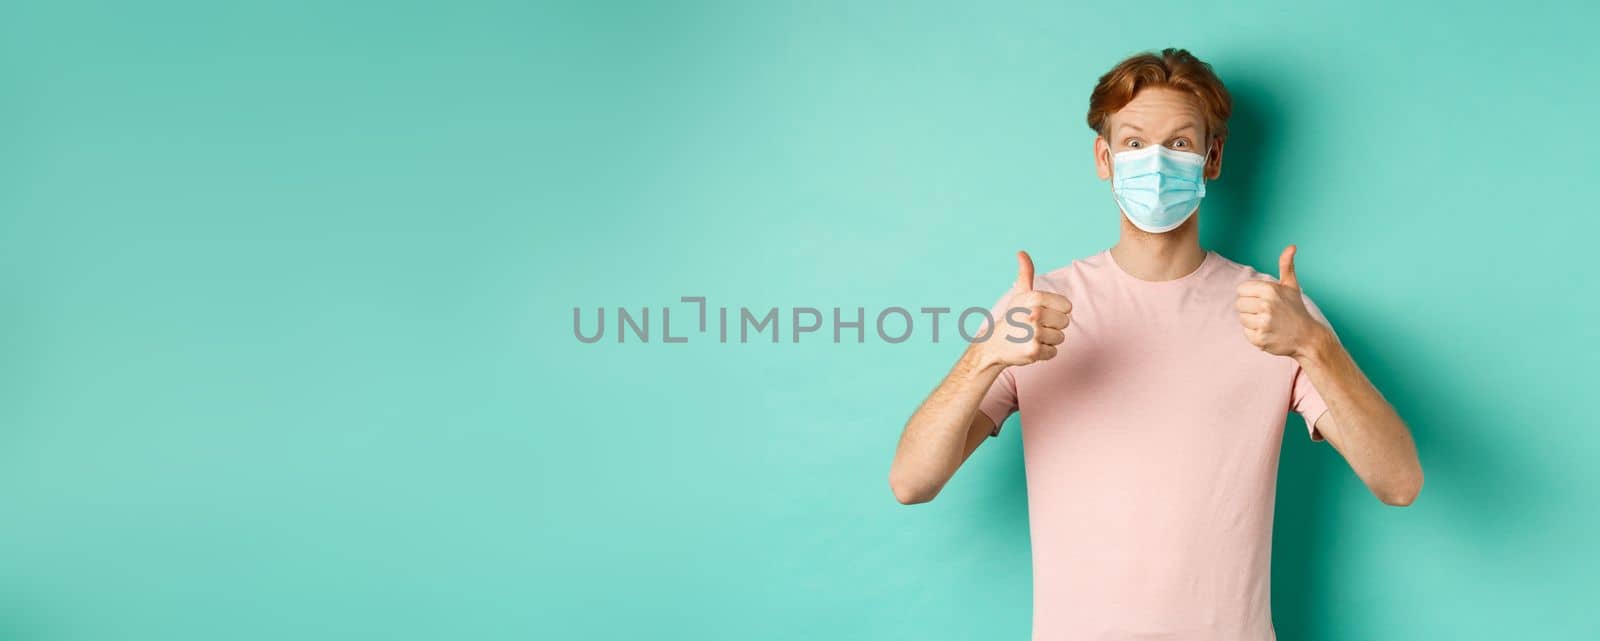 Covid-19, pandemic and lifestyle concept. Cheerful redhead guy in medical mask showing thumbs up in approval, like and praise product, standing over turquoise background.